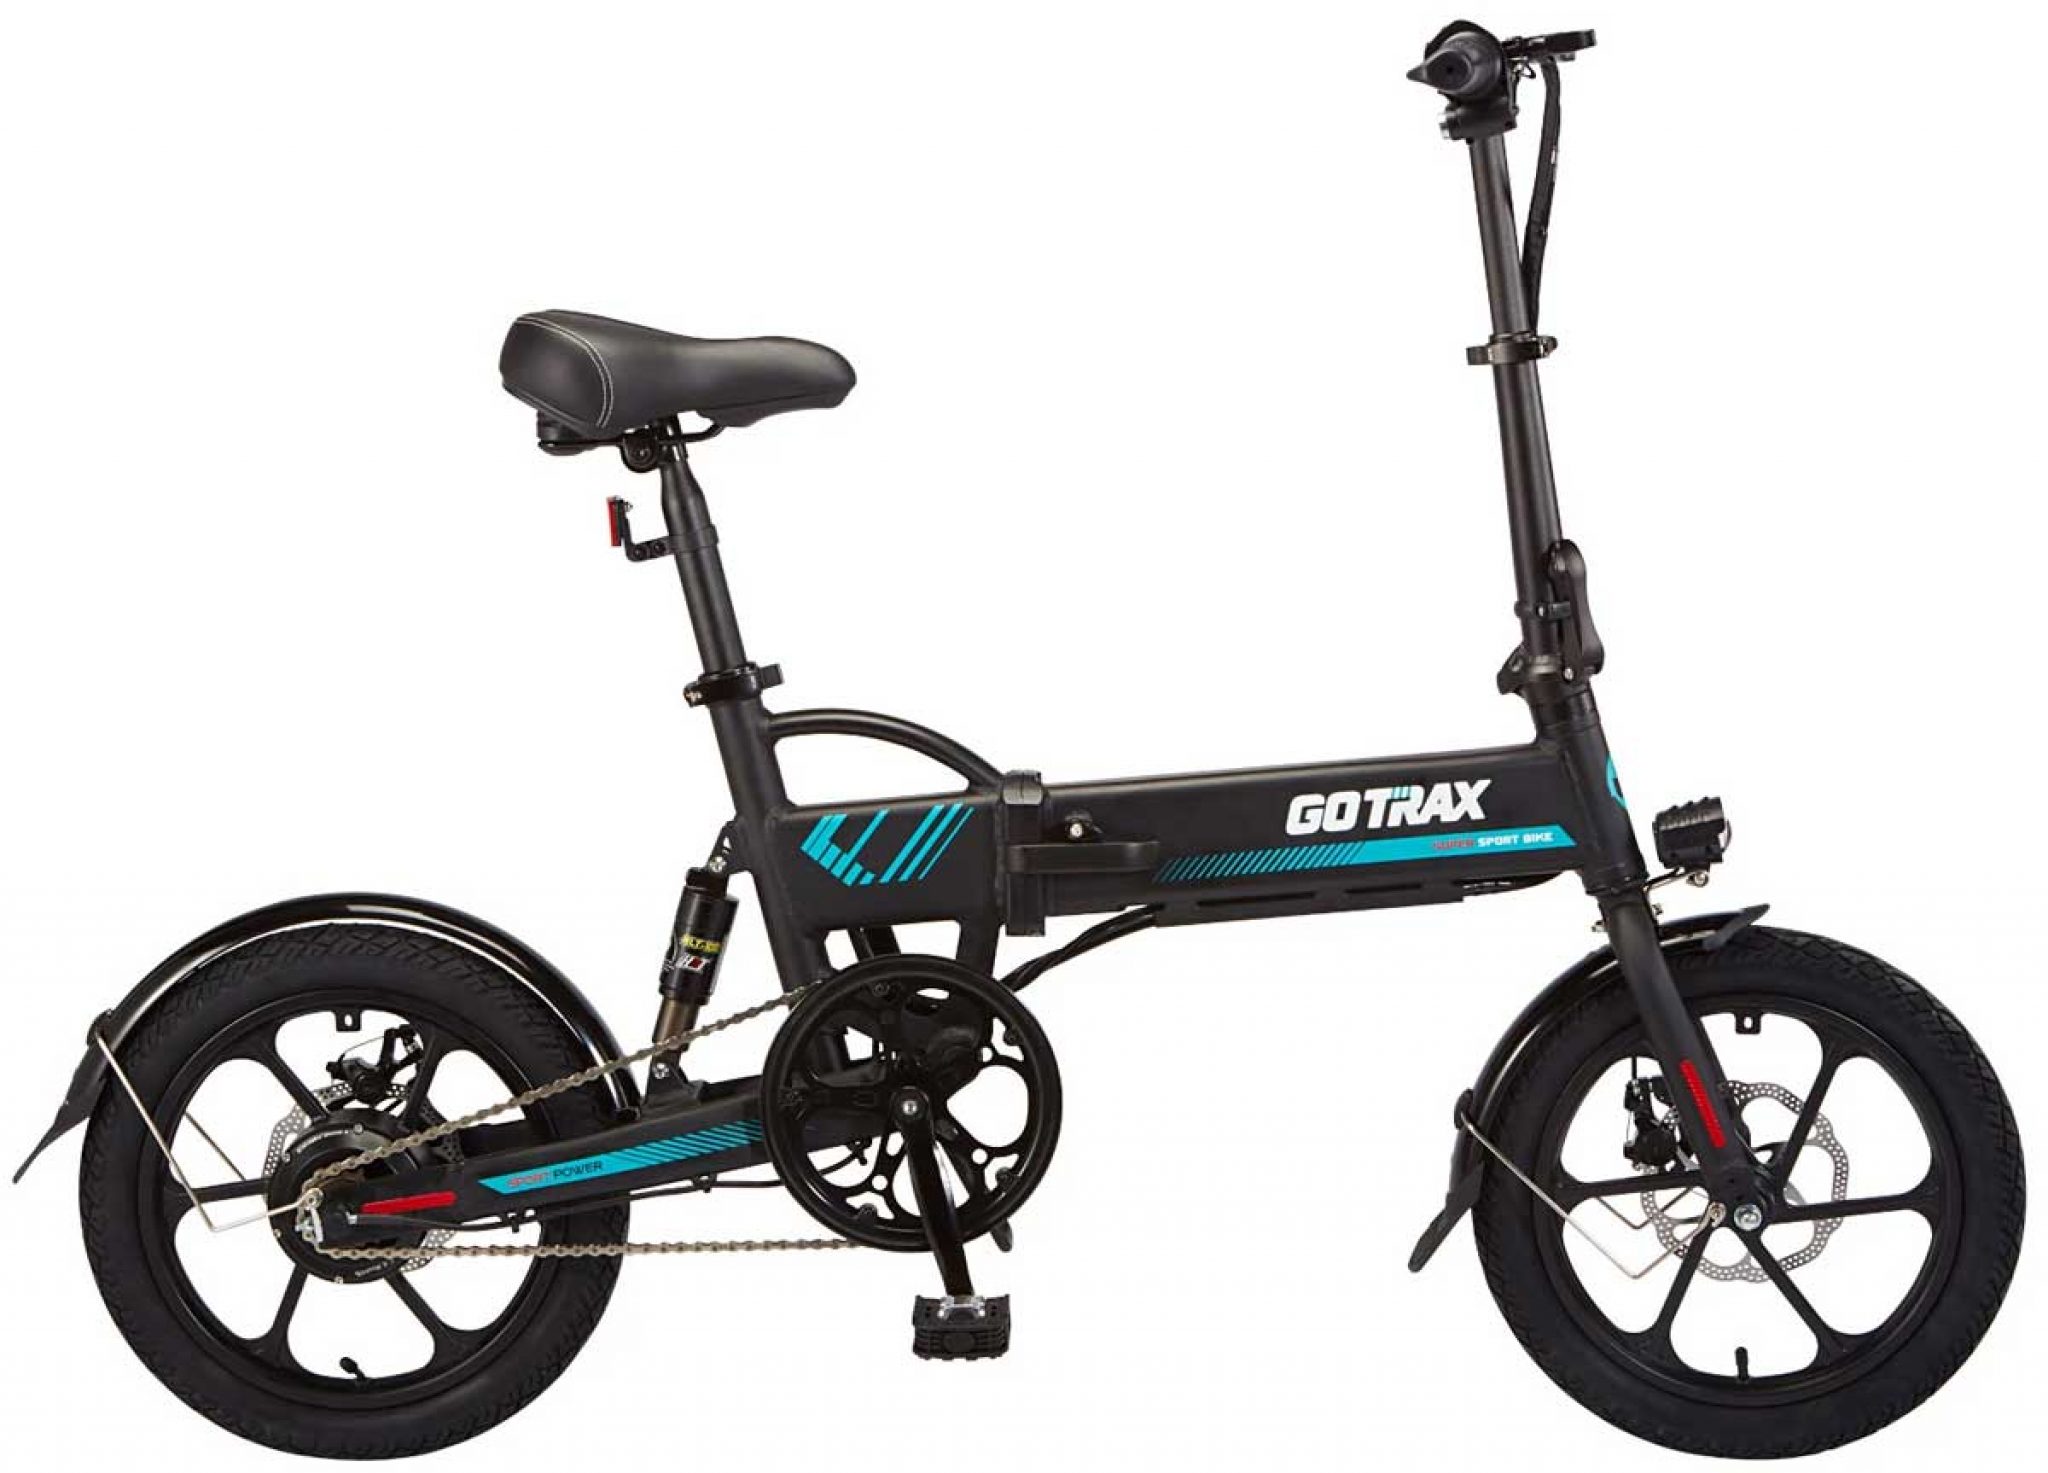 GOTRAX EBE1 FOLDING ELECTRIC BIKE 16" | We Are The Cyclists